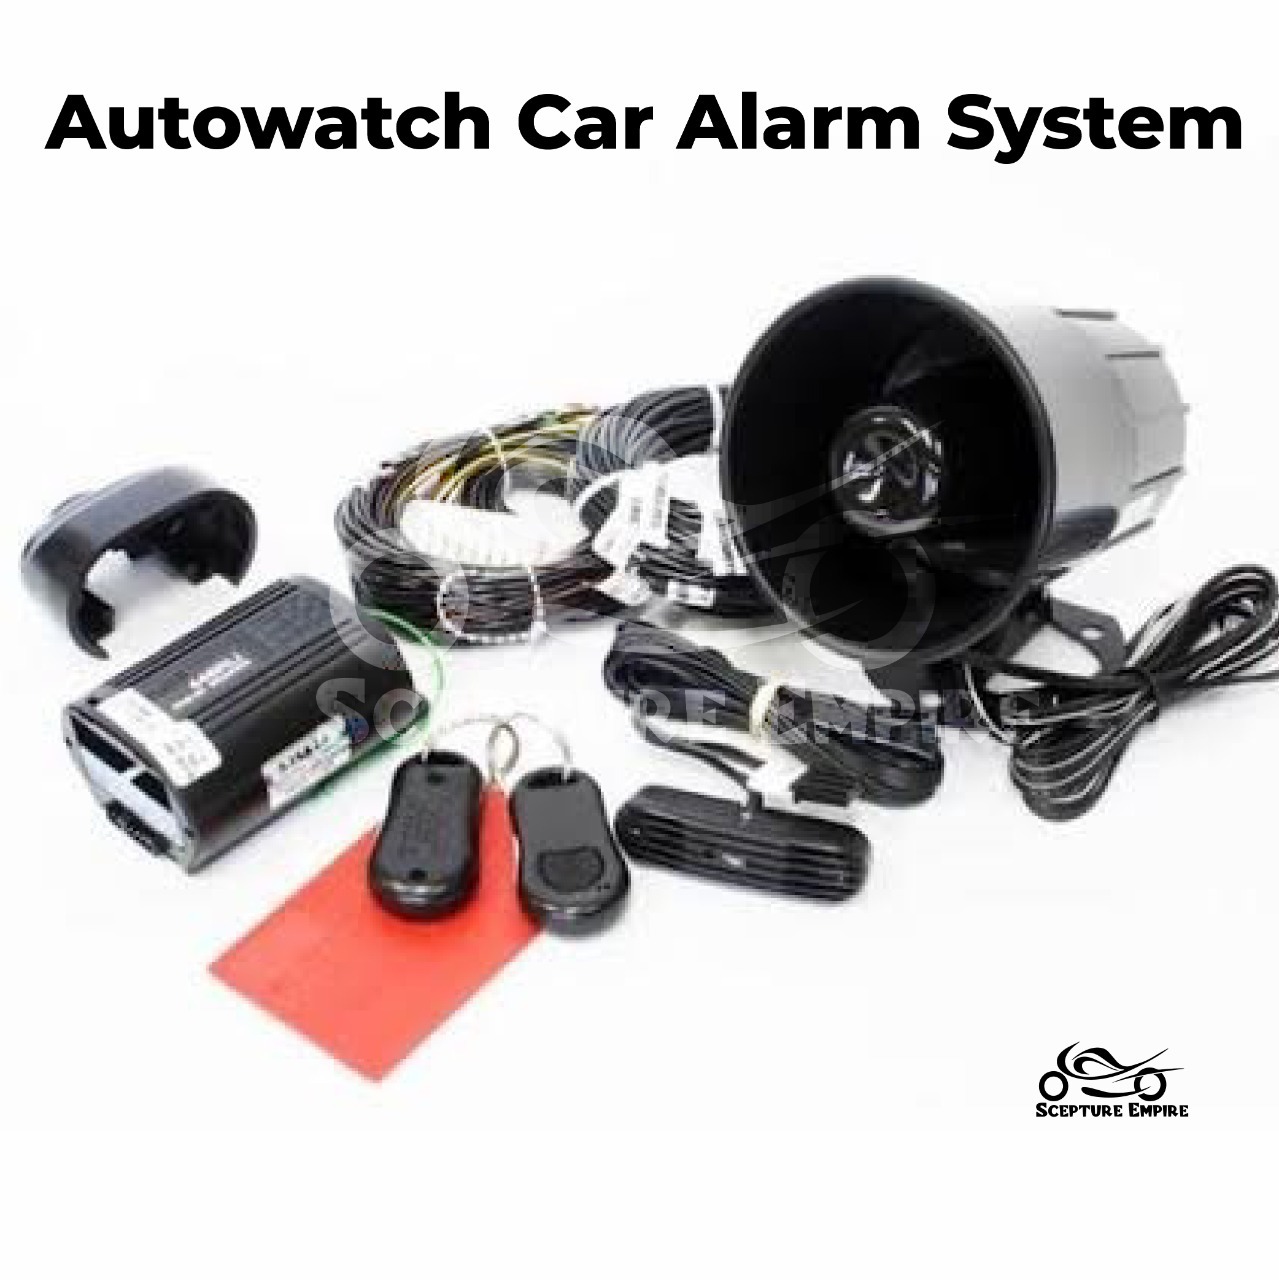 Autowatch car alarm system as used in the article about best car alarm system in Kenya and car alarm system price in Kenya